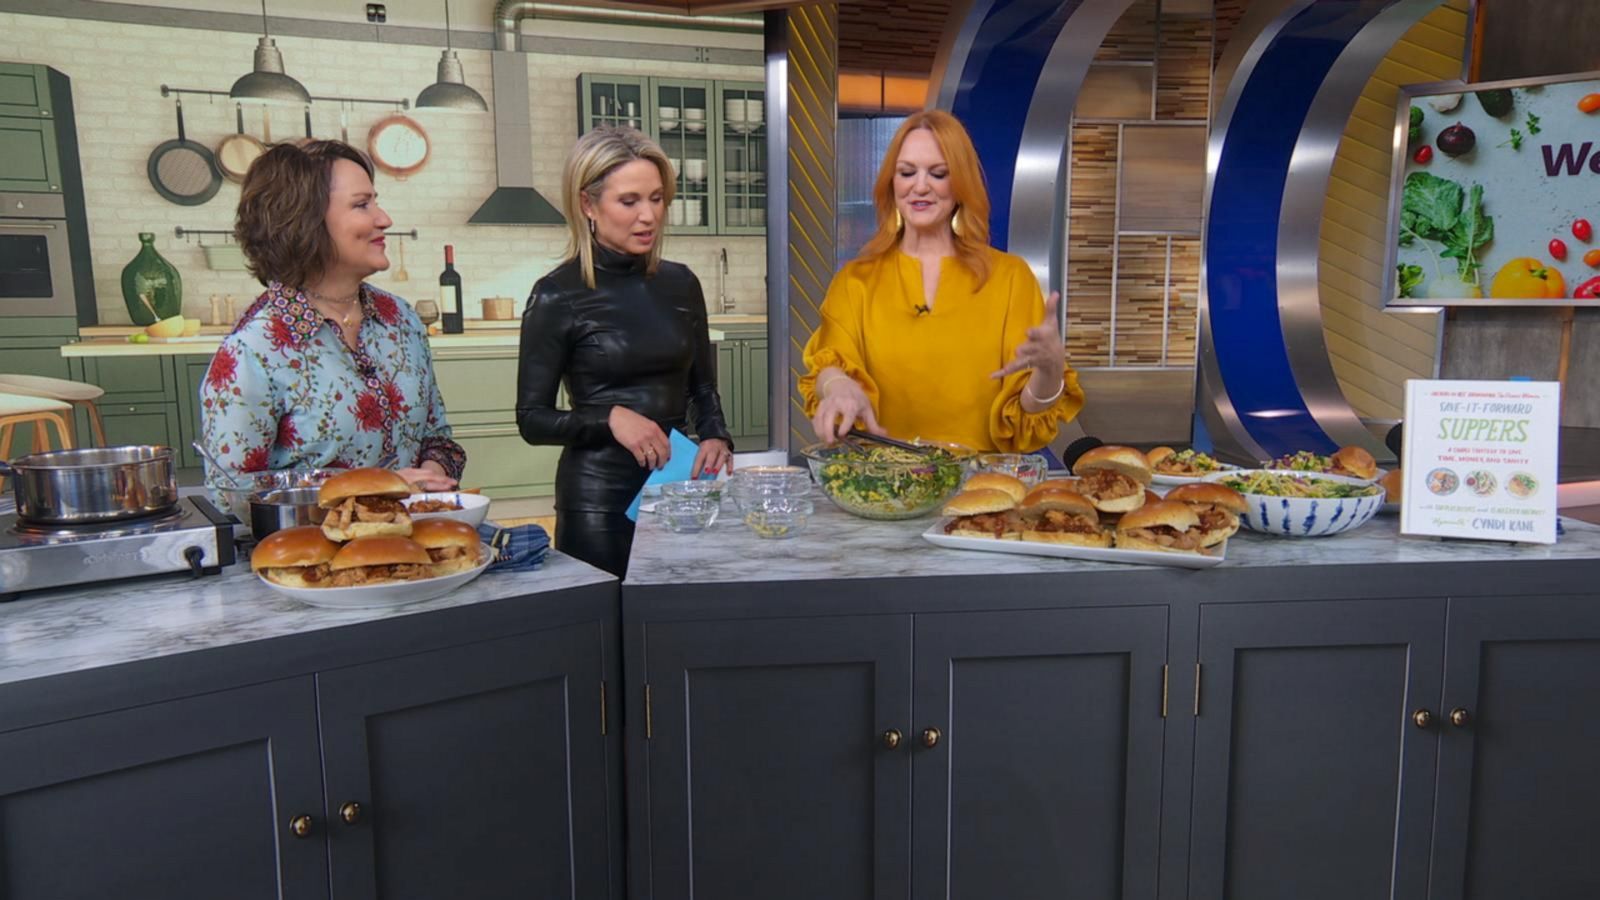 Ree Drummond details how she dropped 43 pounds - Good Morning America